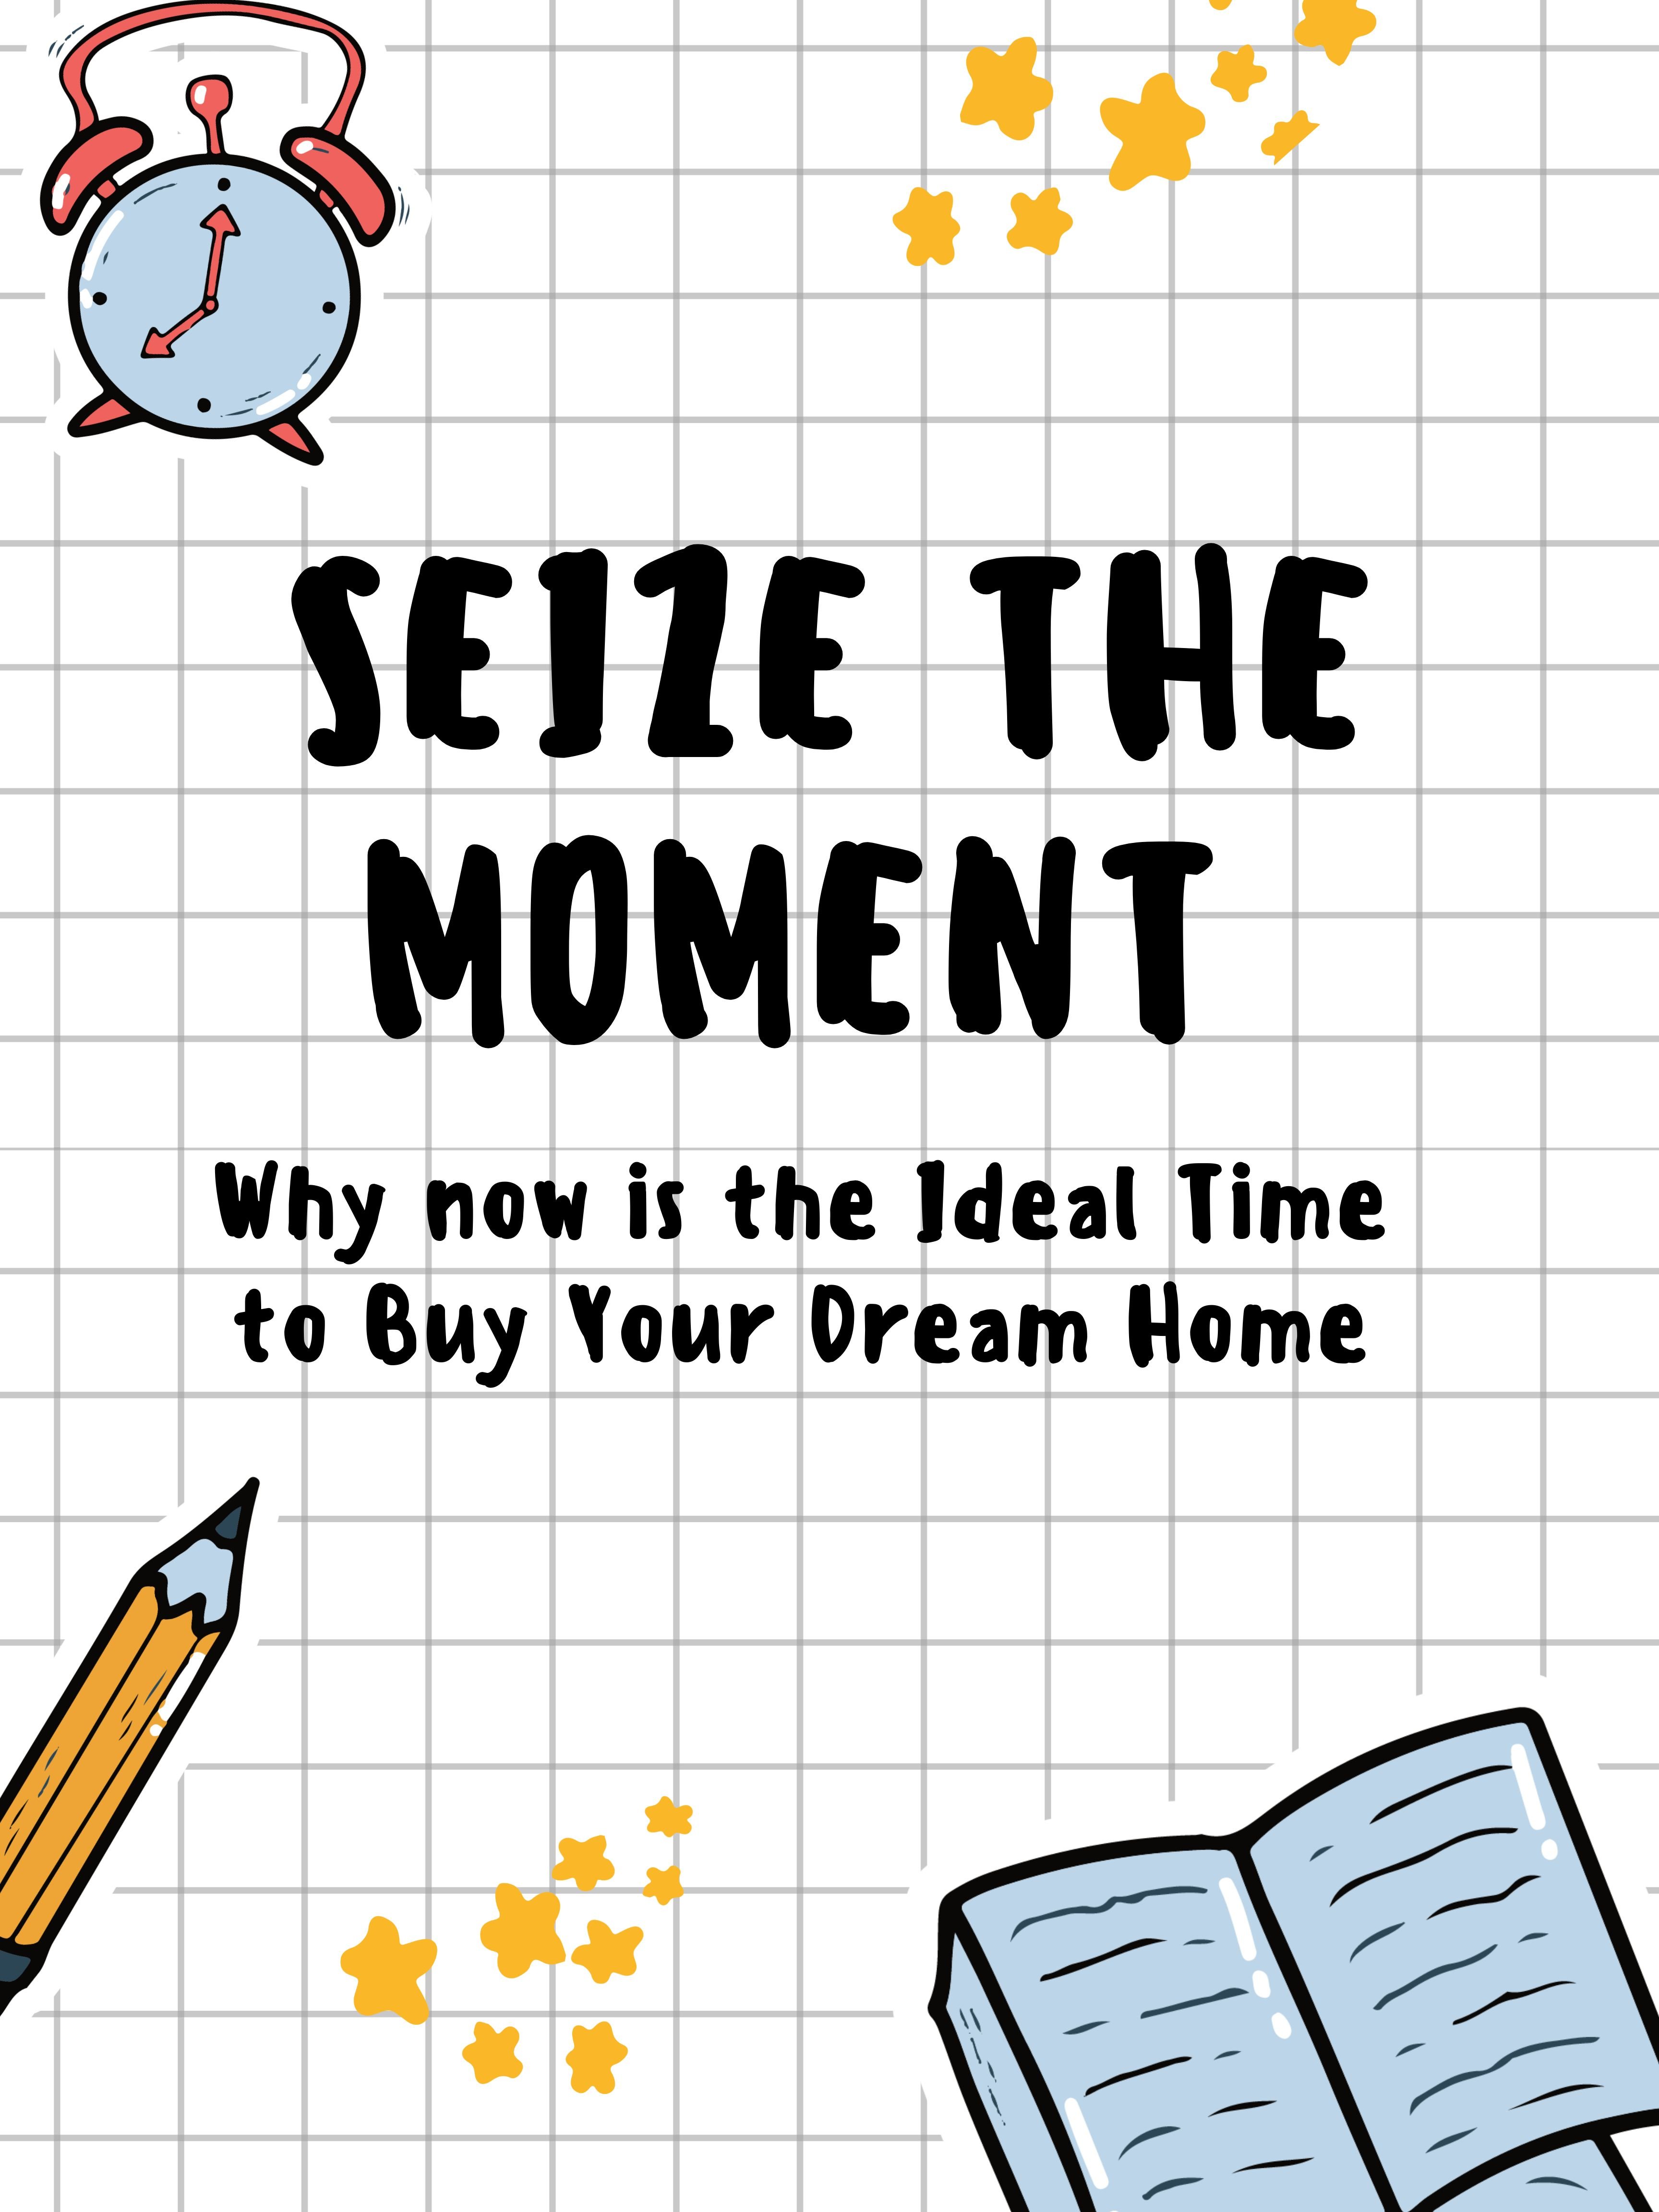 Featured image of Seize the Moment